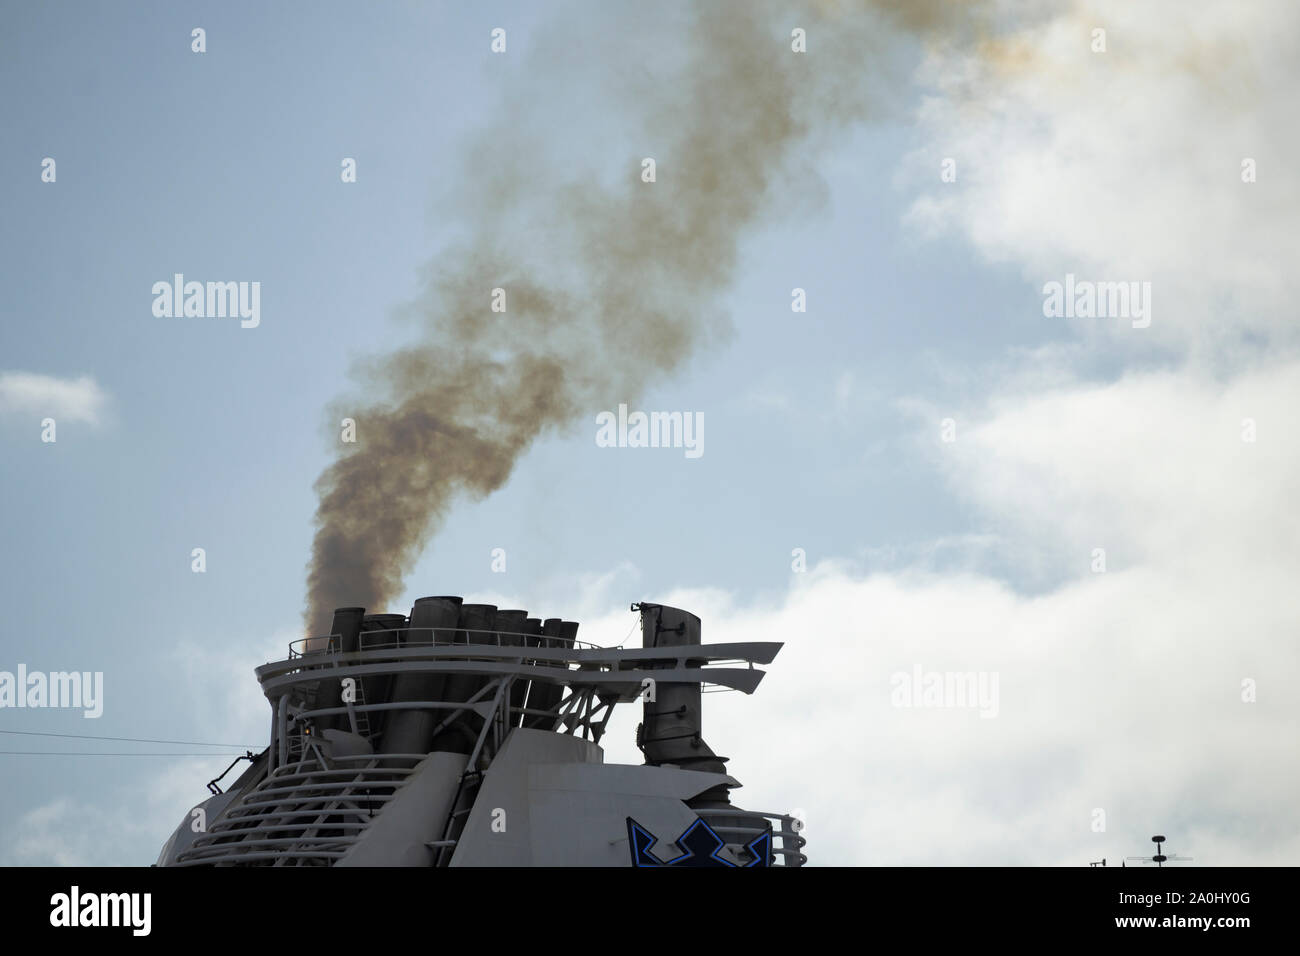 Cruise ship emissions from cruise ship Independece of the Seas. Stock Photo